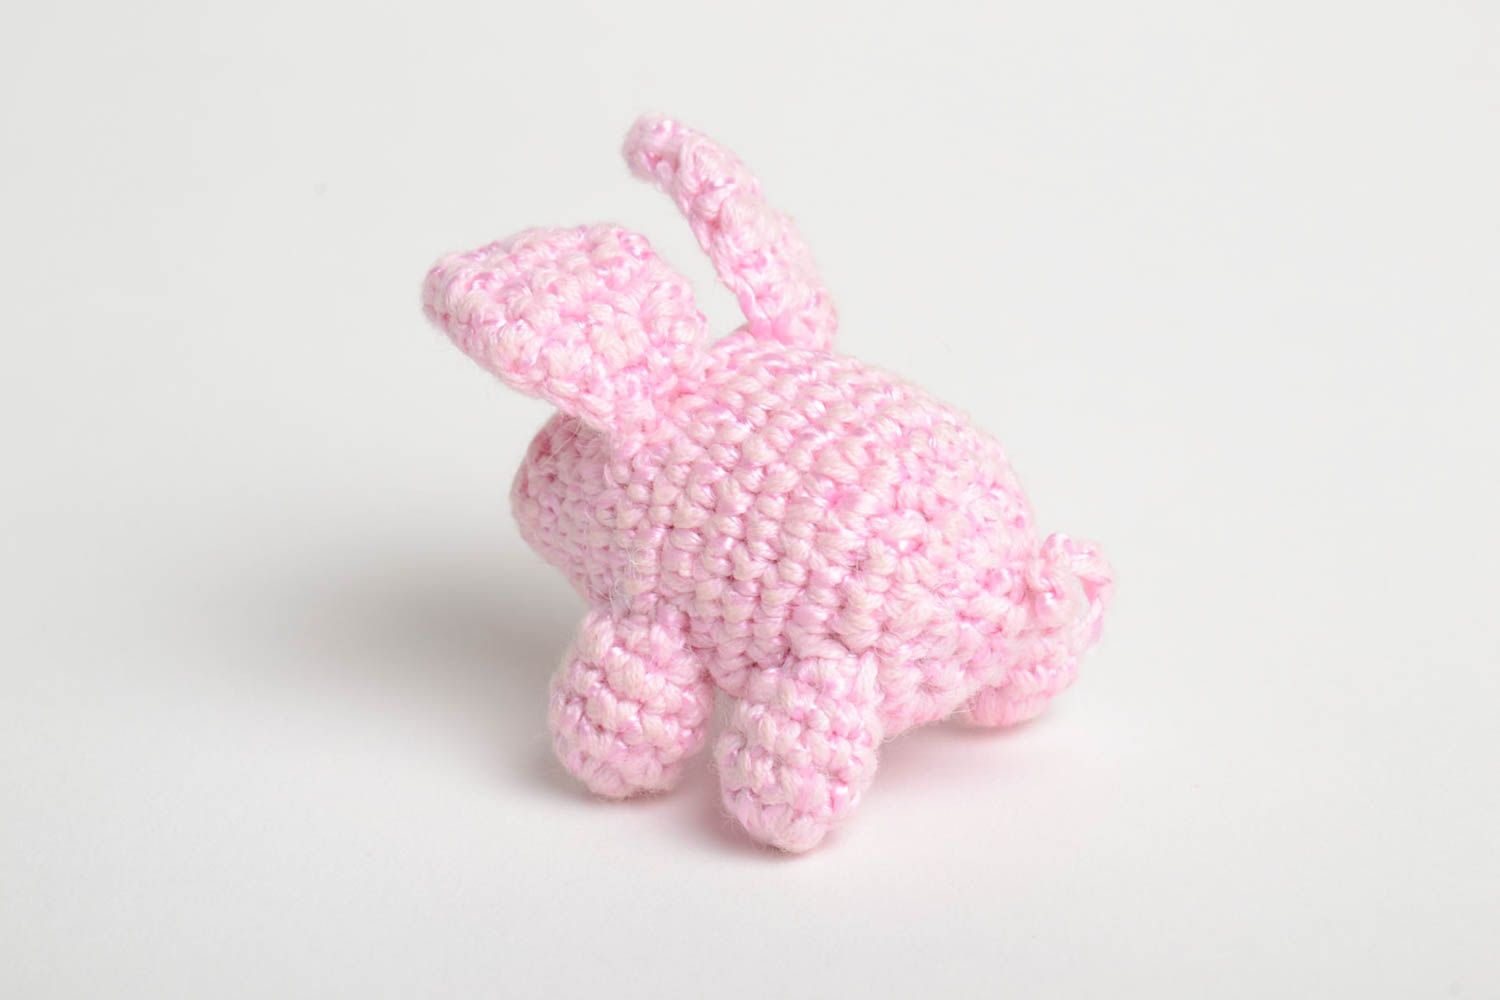 Crocheted pink soft toy cute handmade piglet soft toys children gifts ideas photo 3